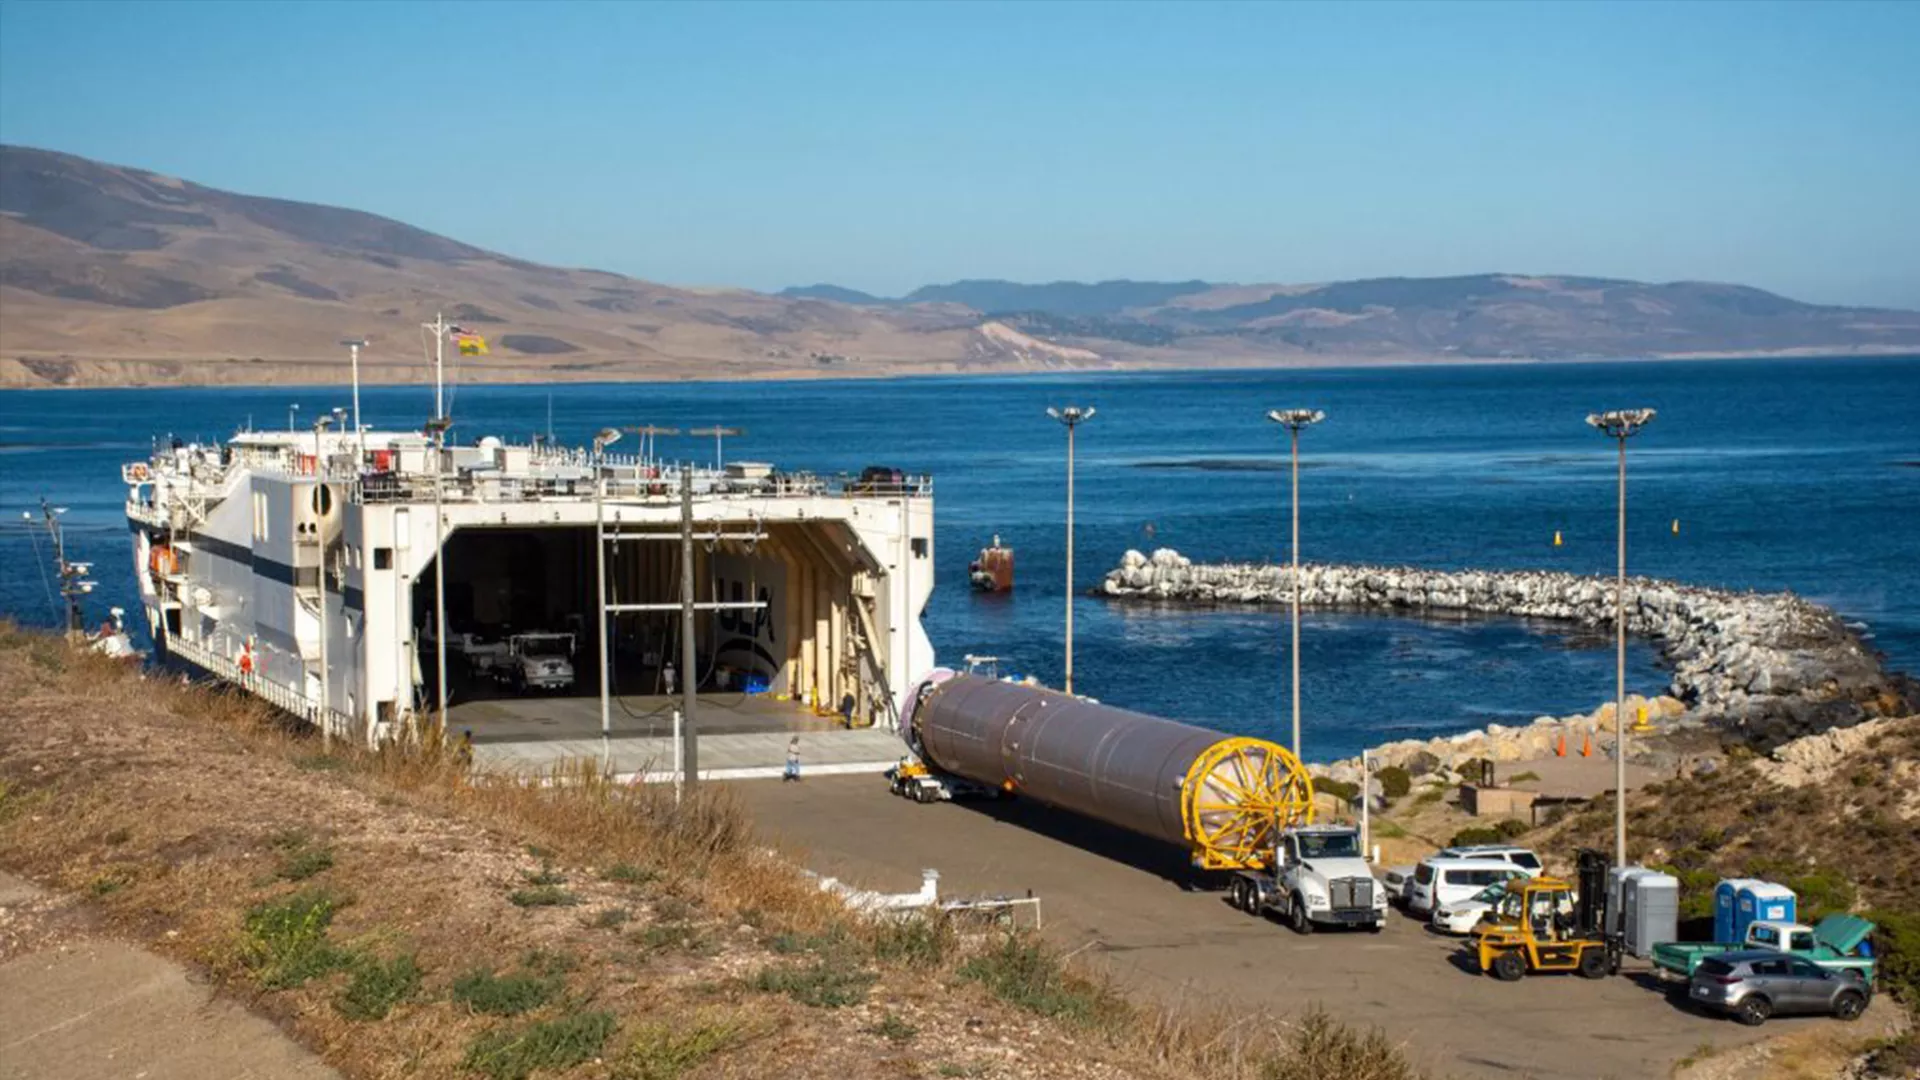 Image of the JPSS-2 Rocket being offloaded in California